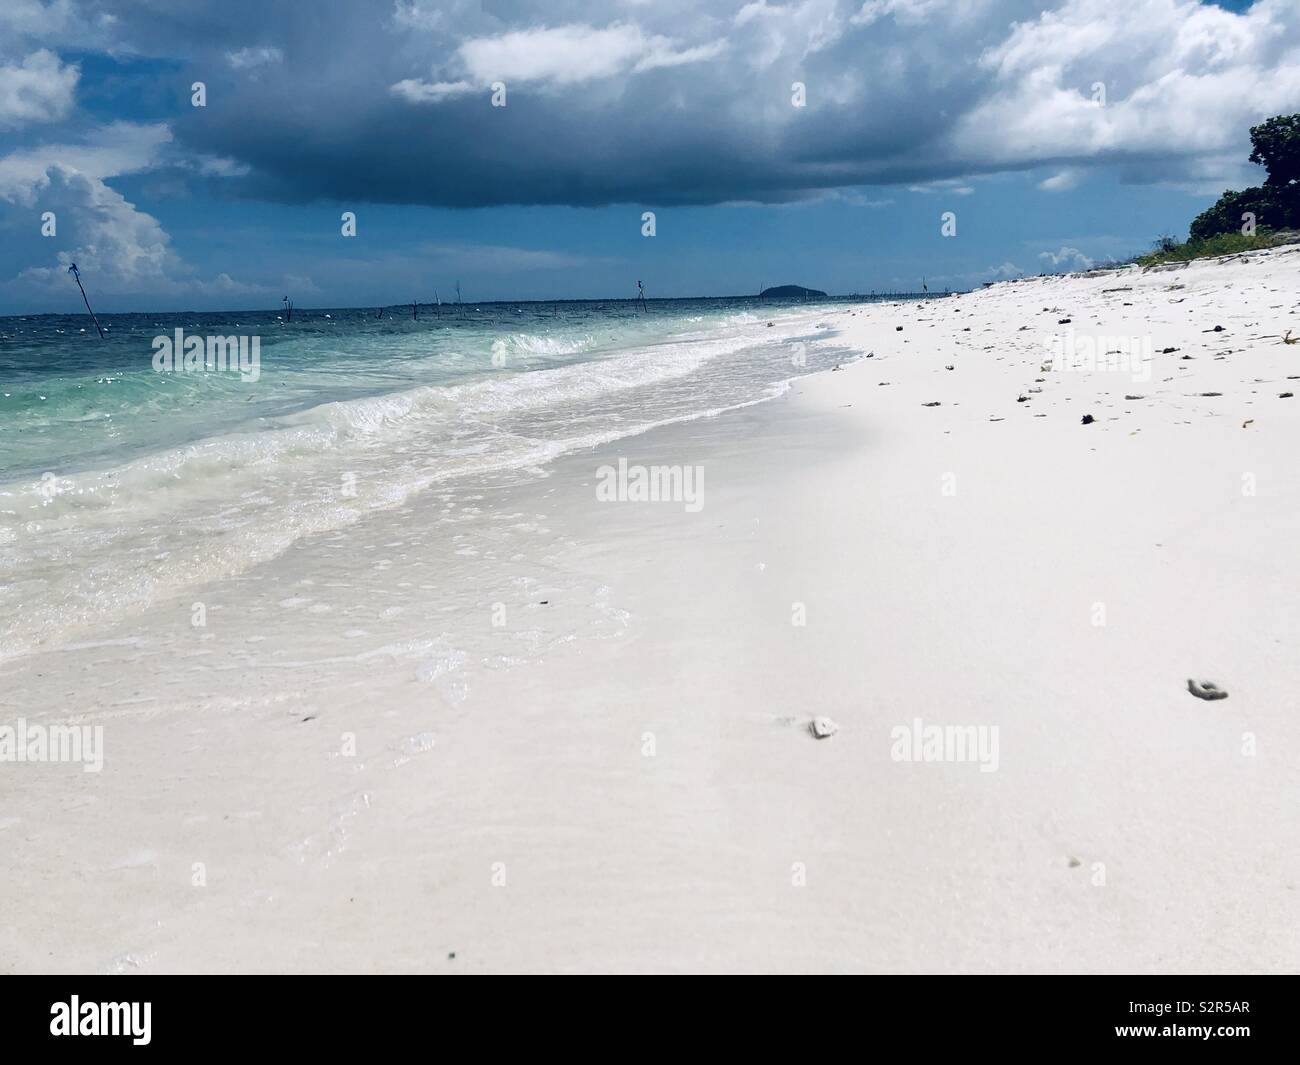 White powdery sand of Minis Island in conflicted torn town of Patikul, Sulu in Southern Philippines. Stock Photo